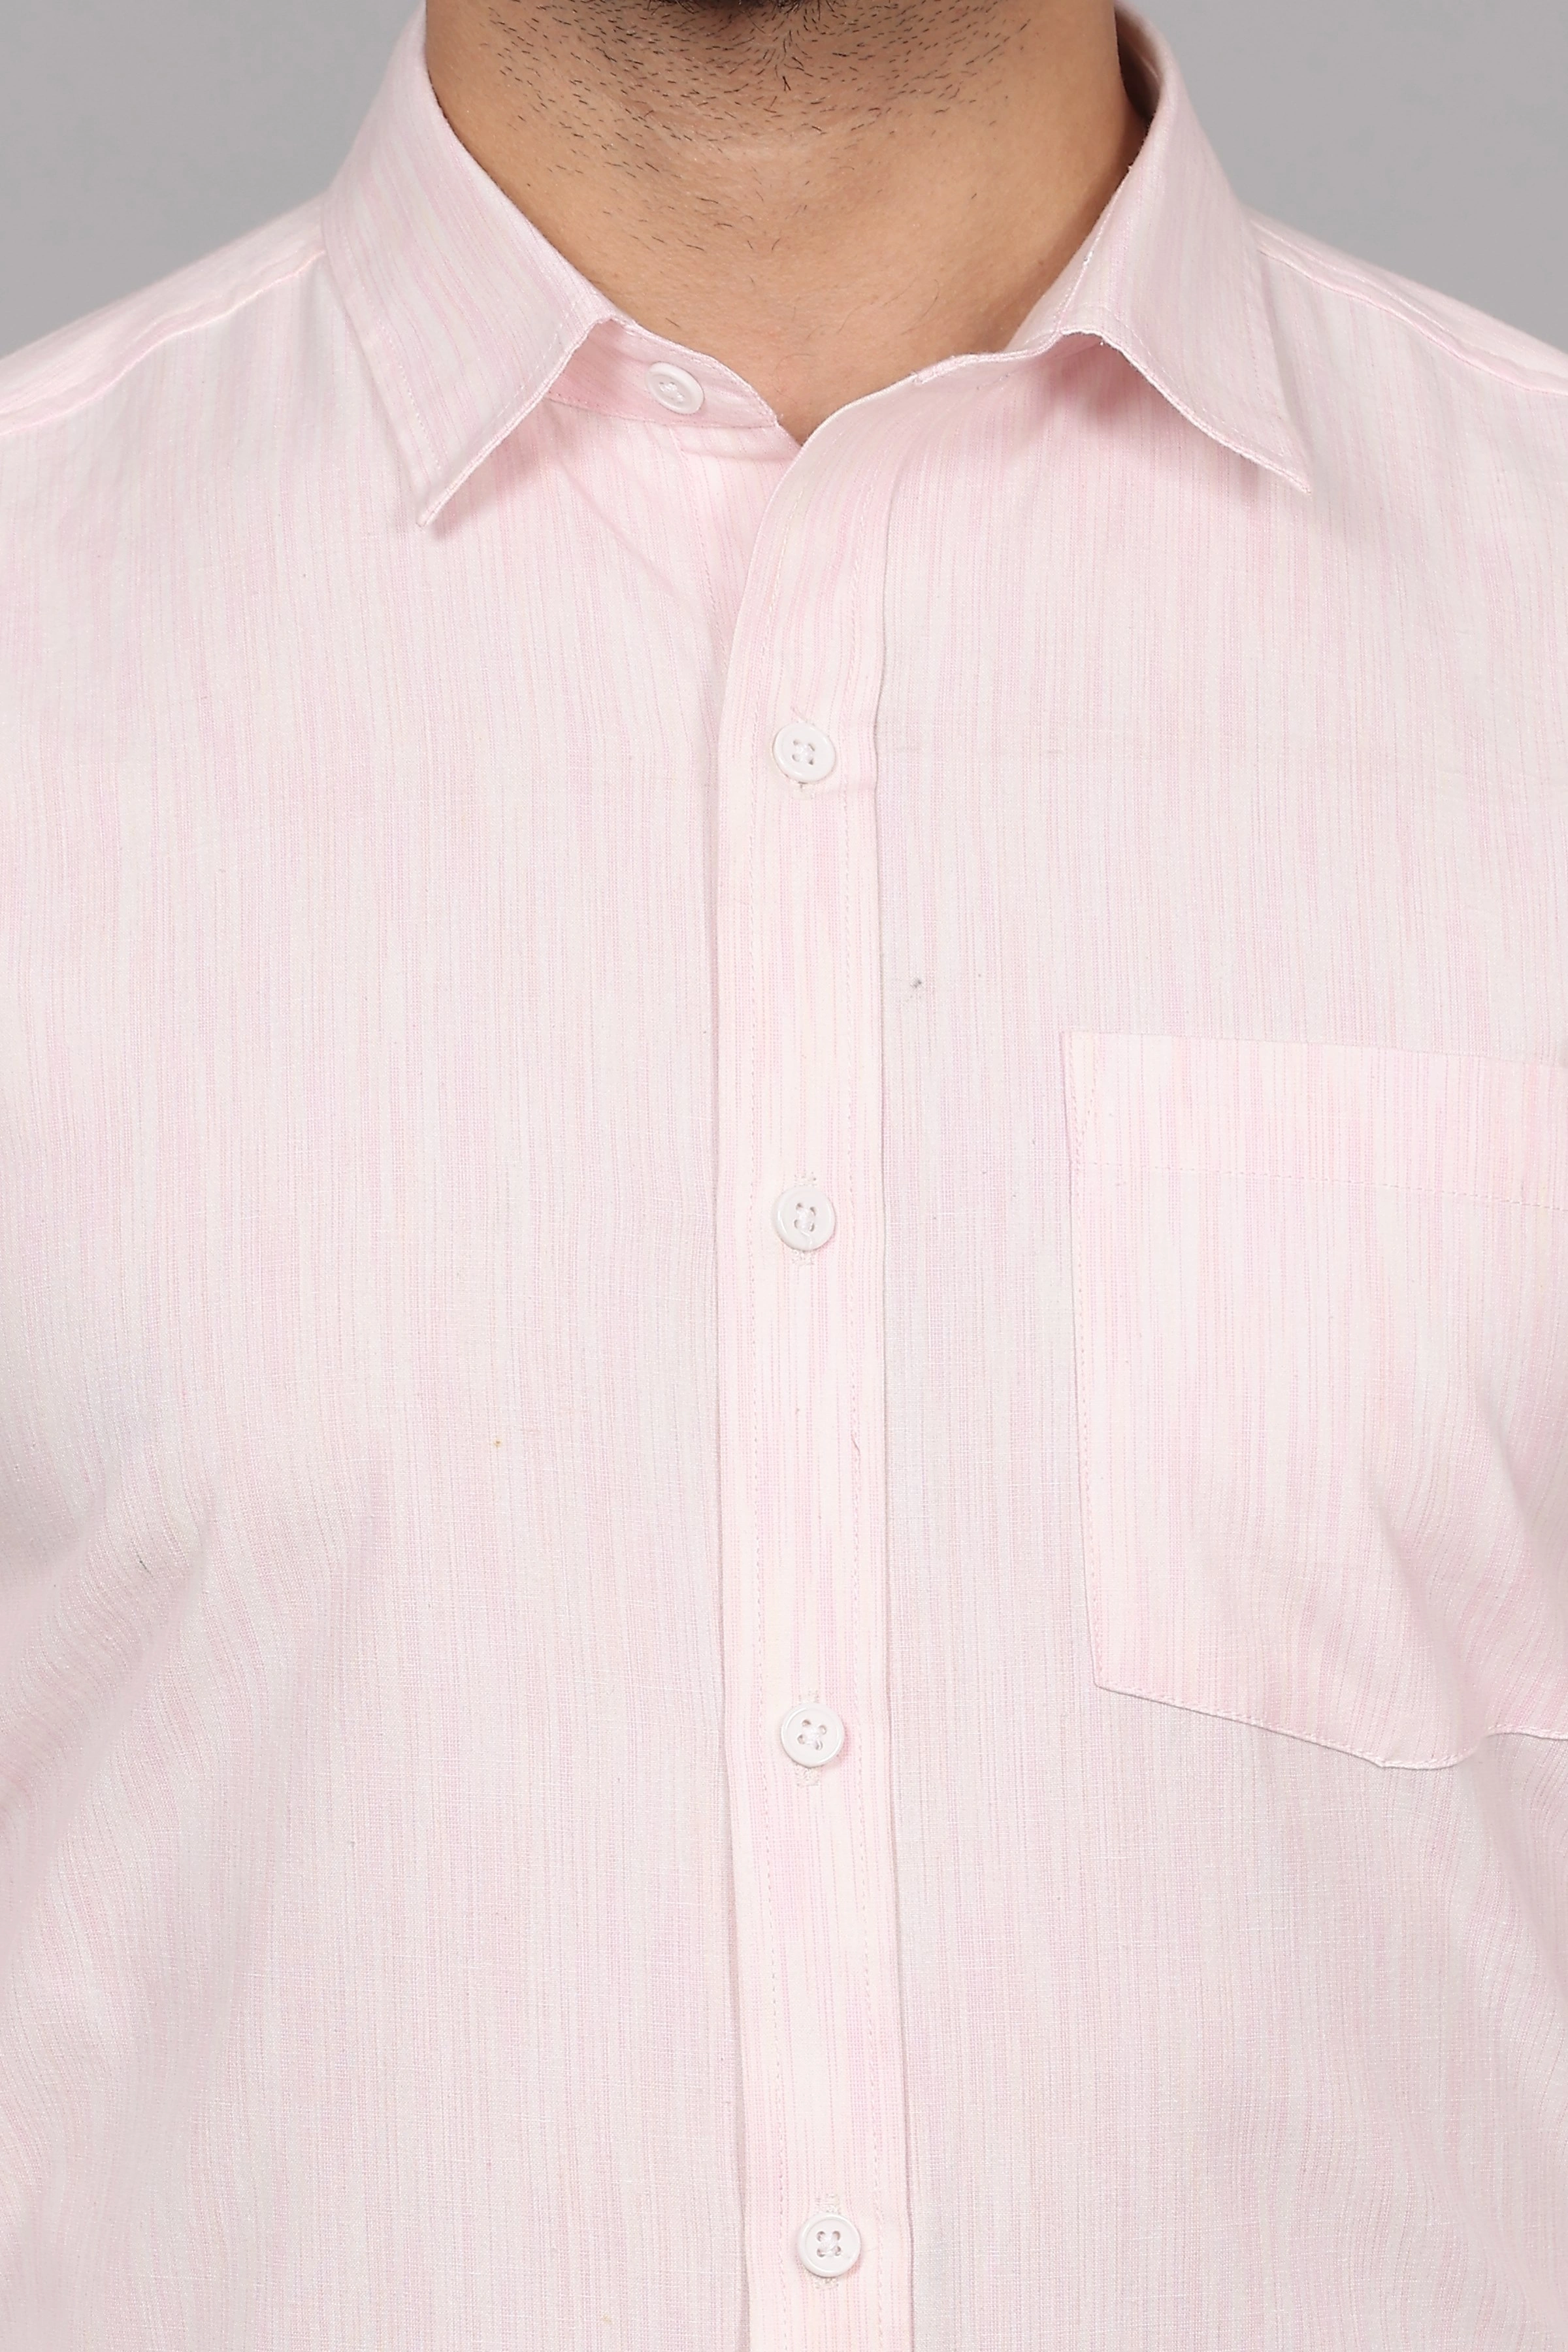 Textured Pink White Business Formal Cotton Shirt-S-5